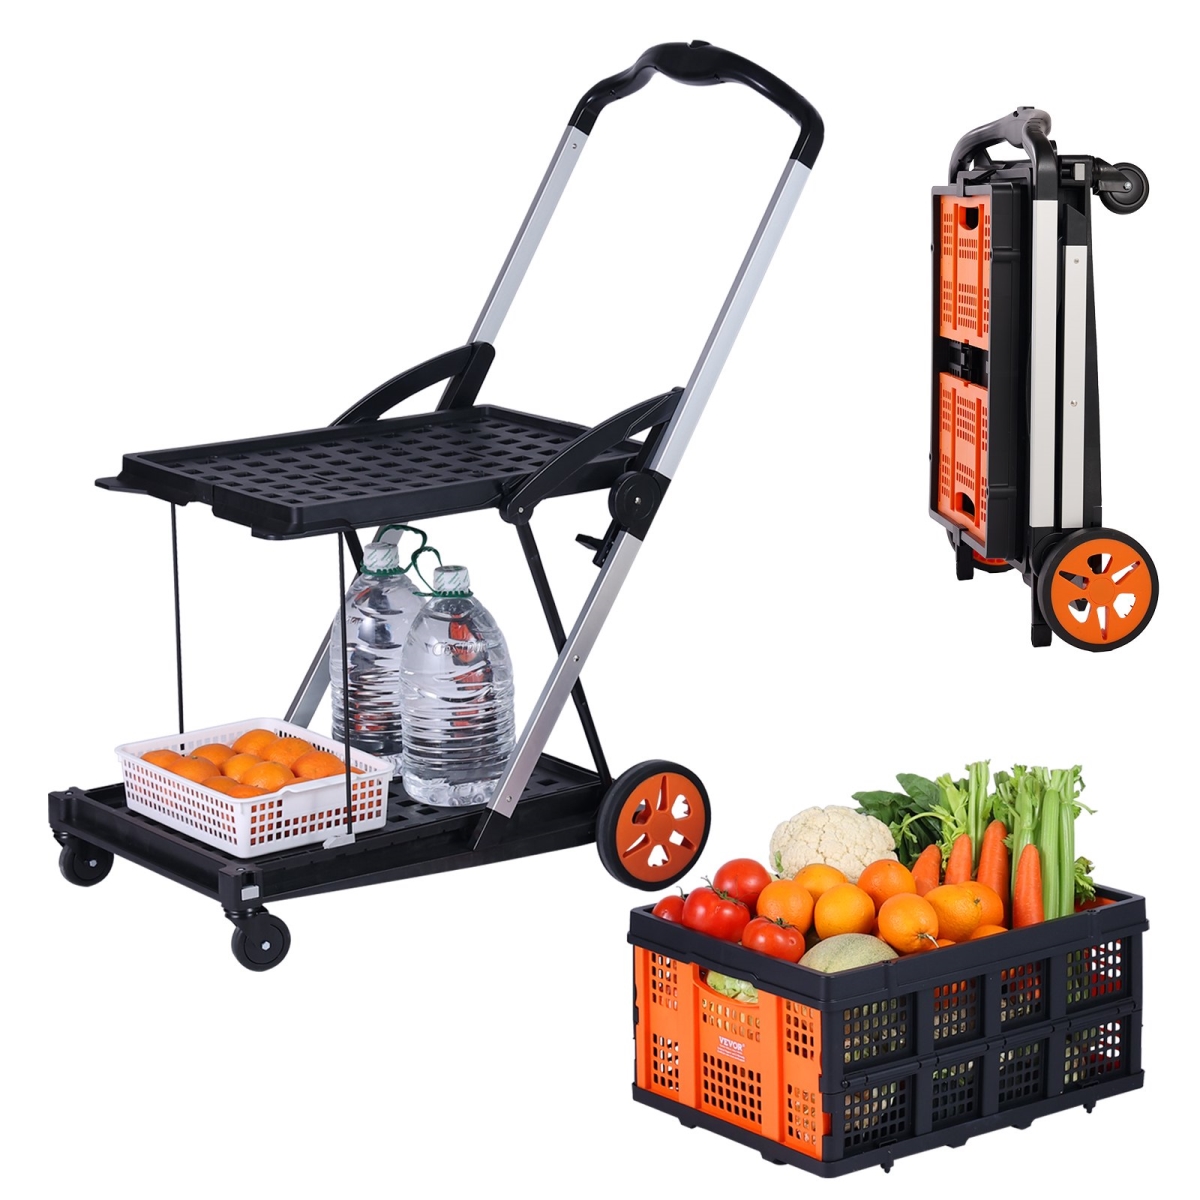 Picture of Vevor TCSGWCDCZLDW4R8J5V0 198 lbs Multi Use Functional Collapsible Cart